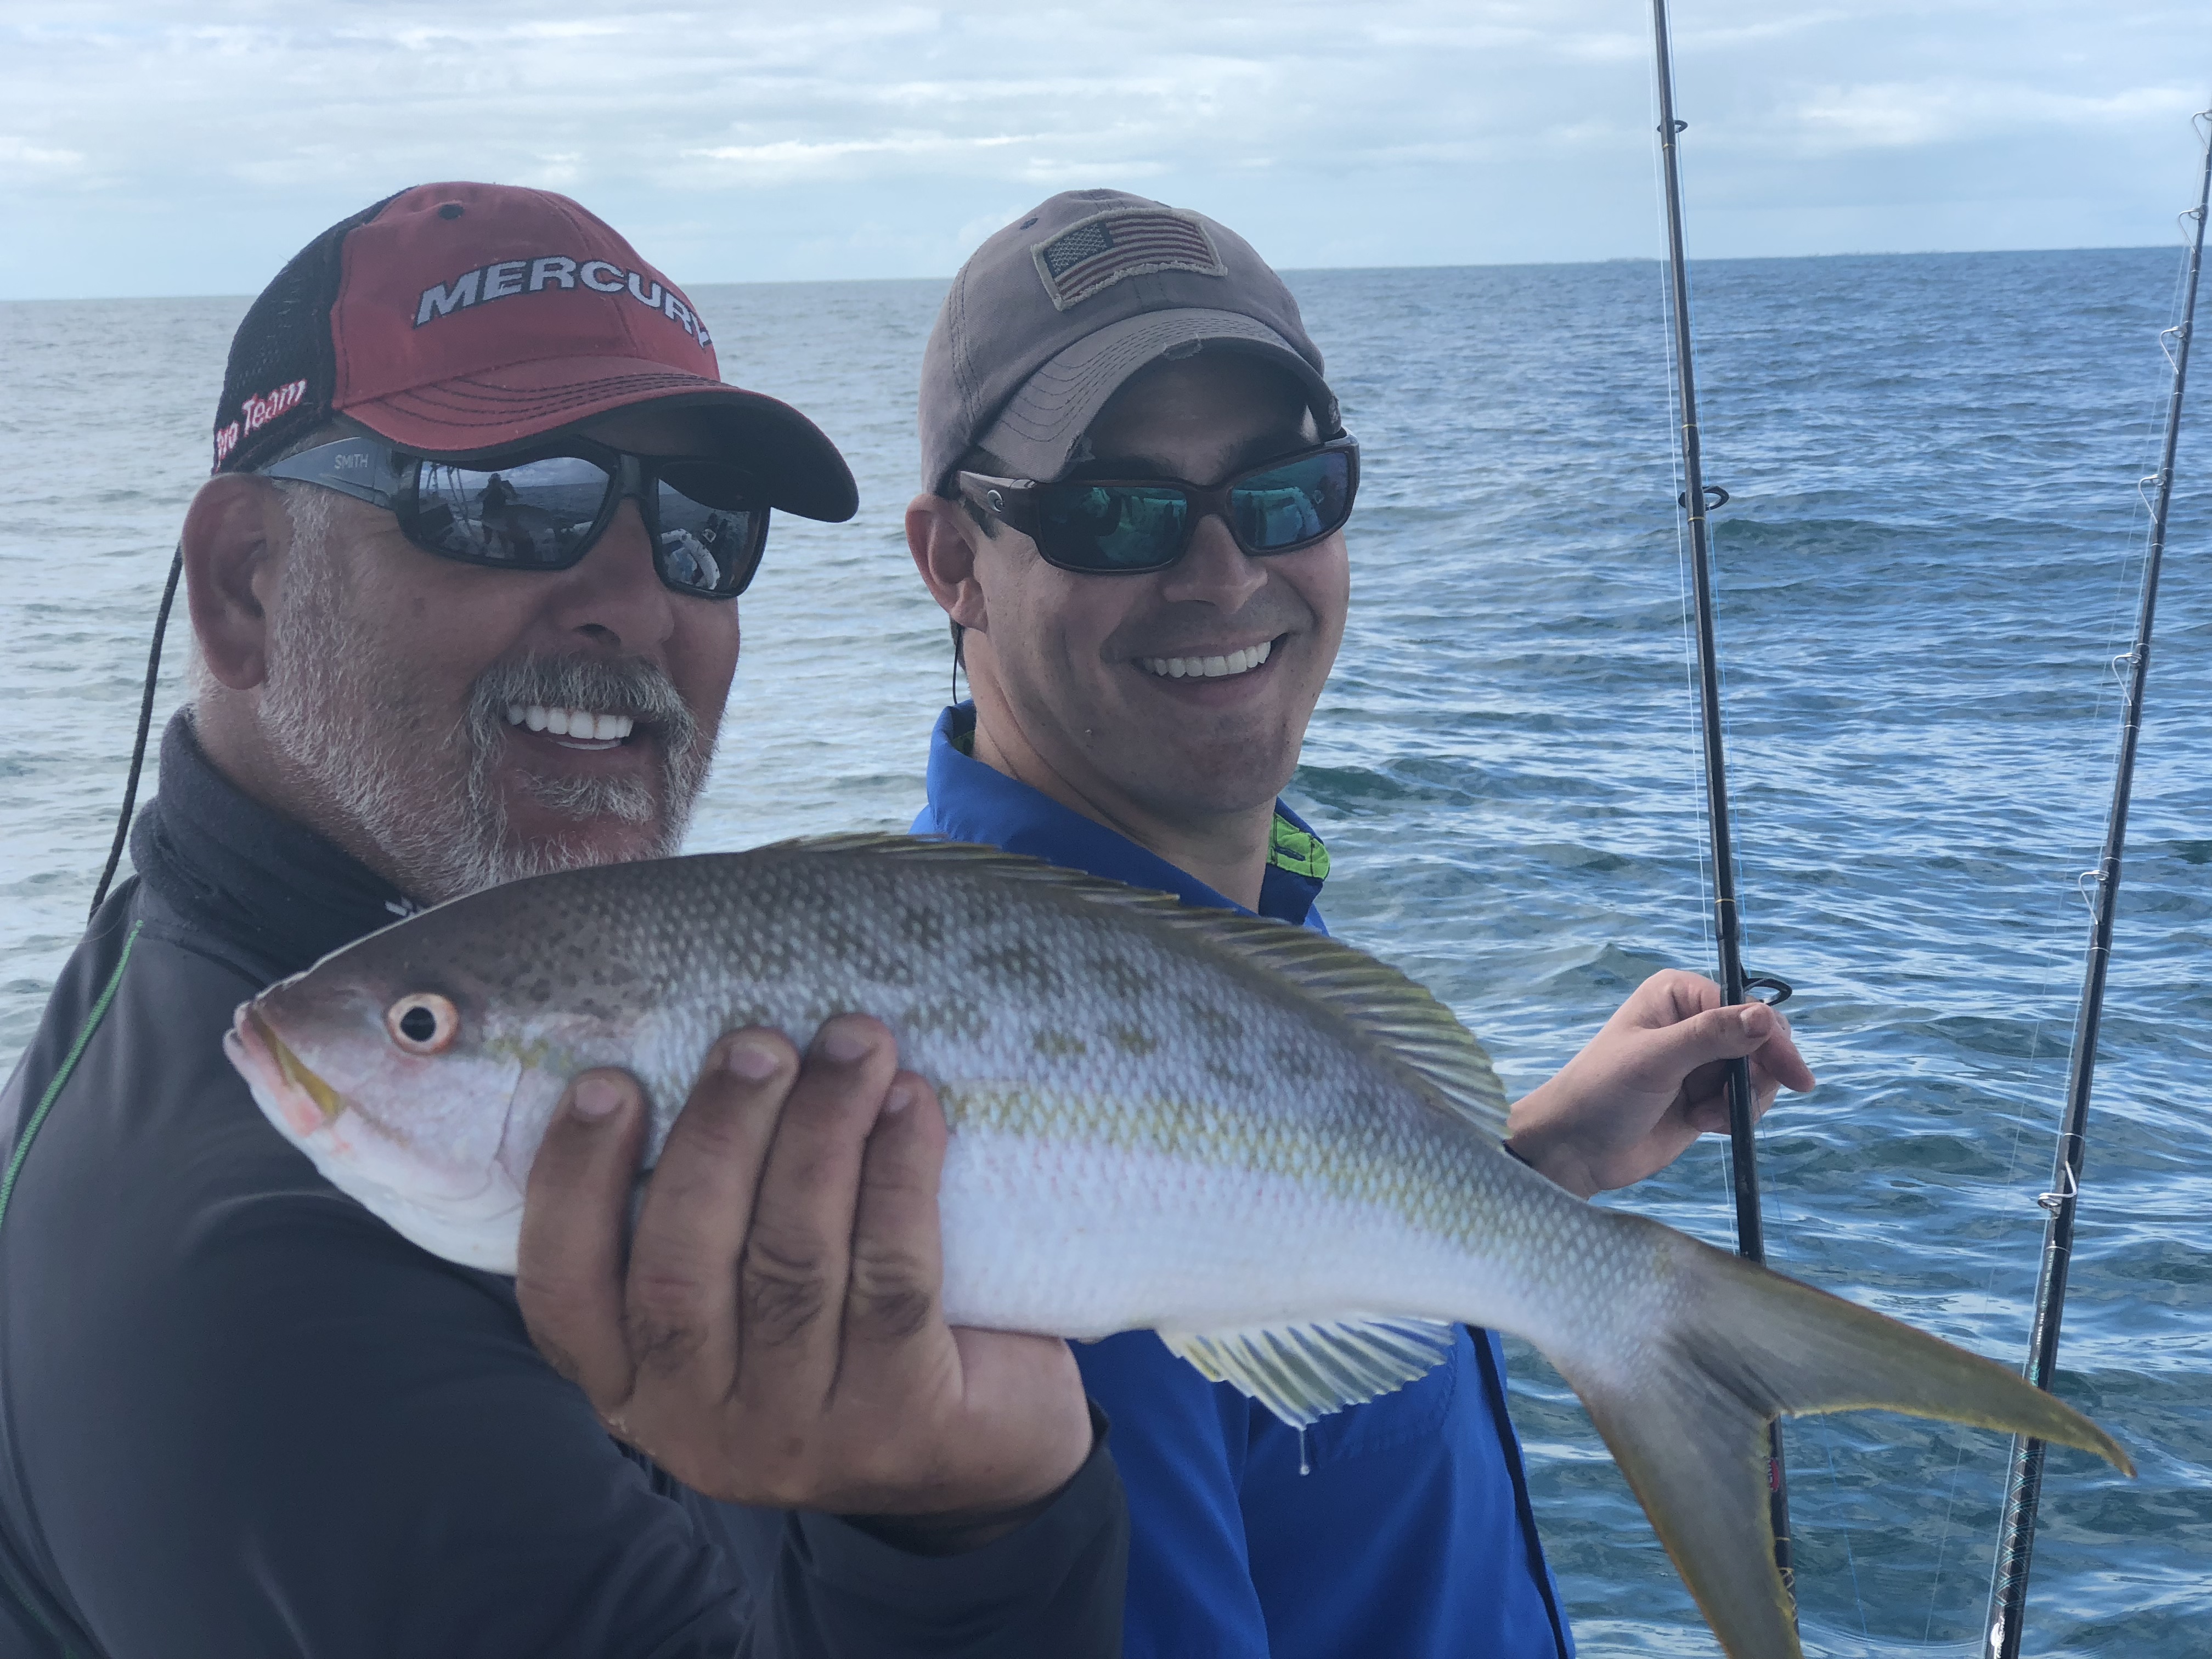 What’s biting in the Florida Keys